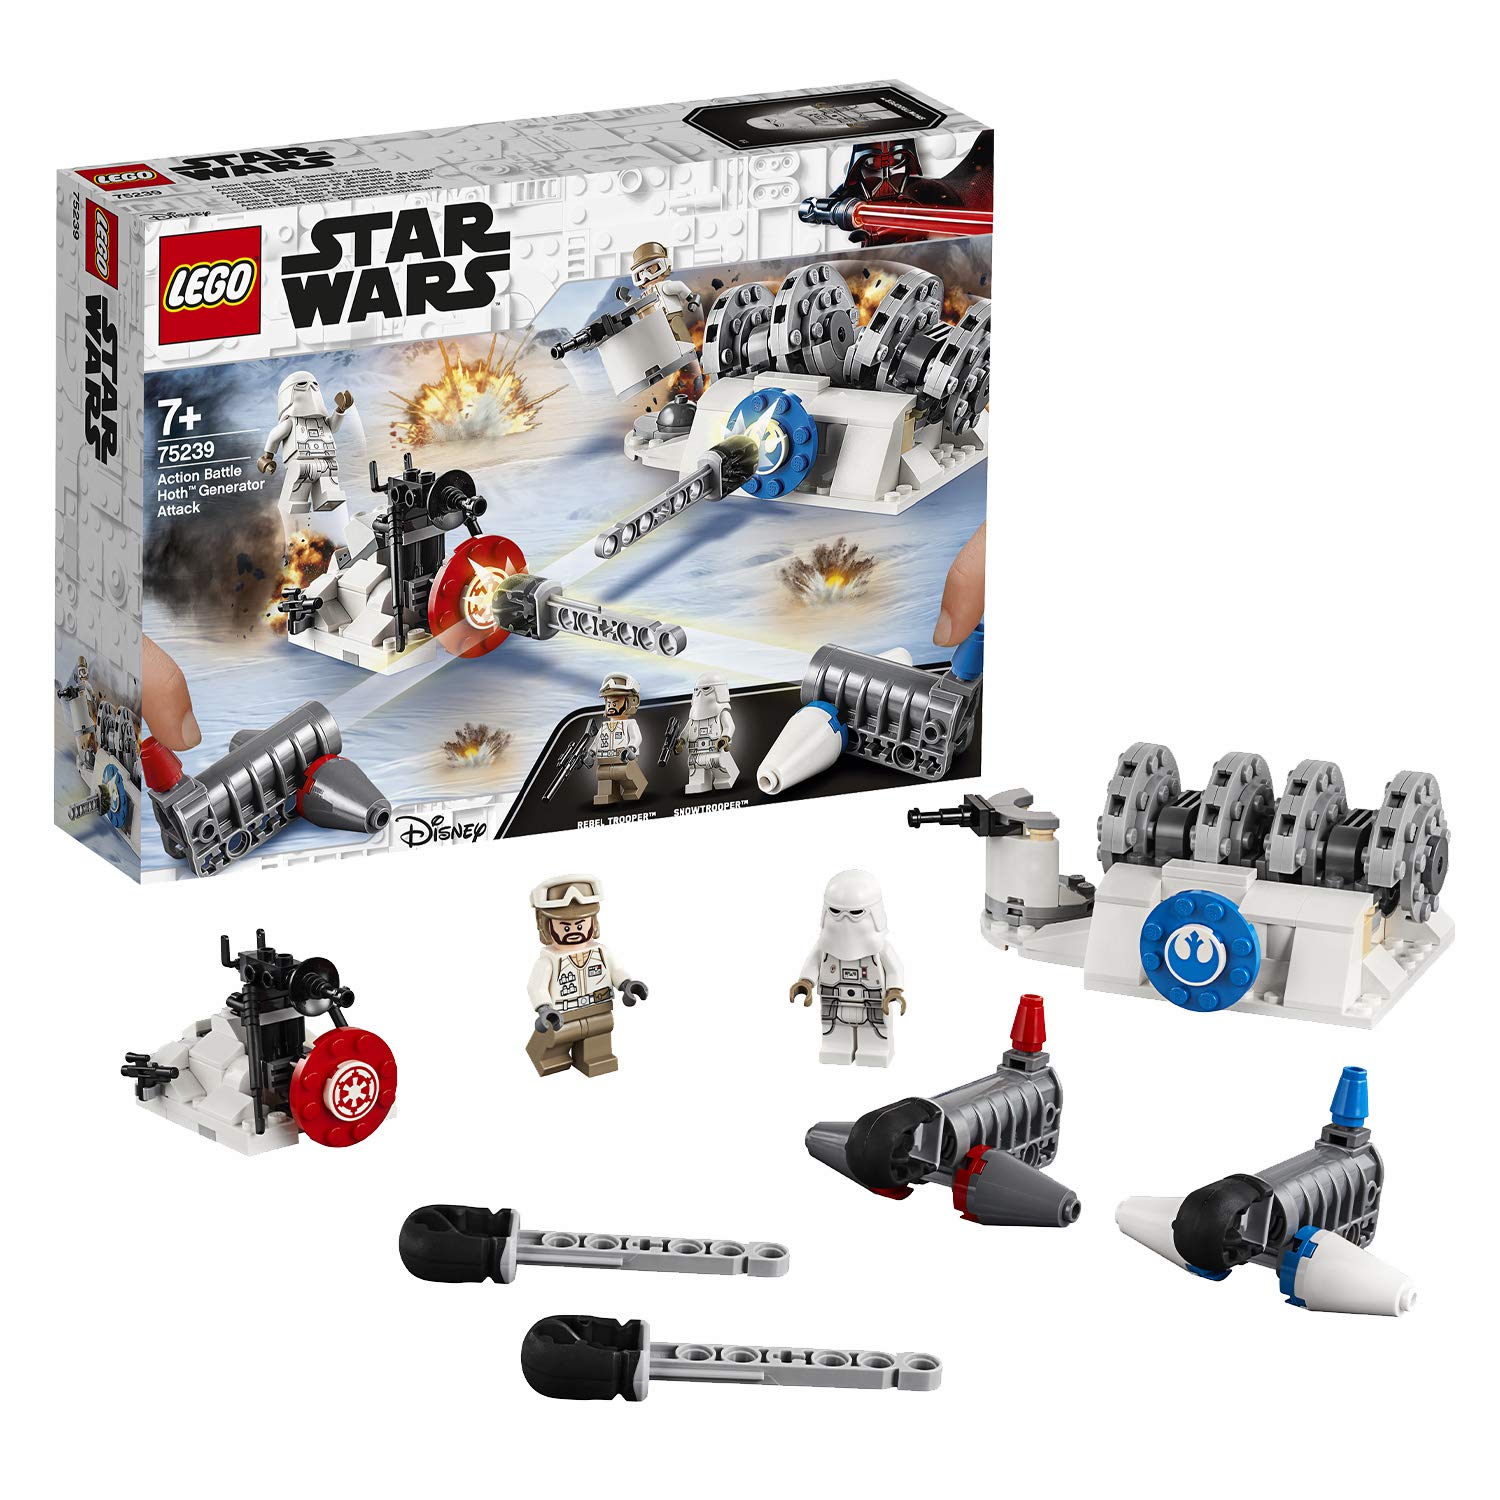 Lego Star Wars 75239 - The Empire Strikes Back Action Battle Hoth Generator